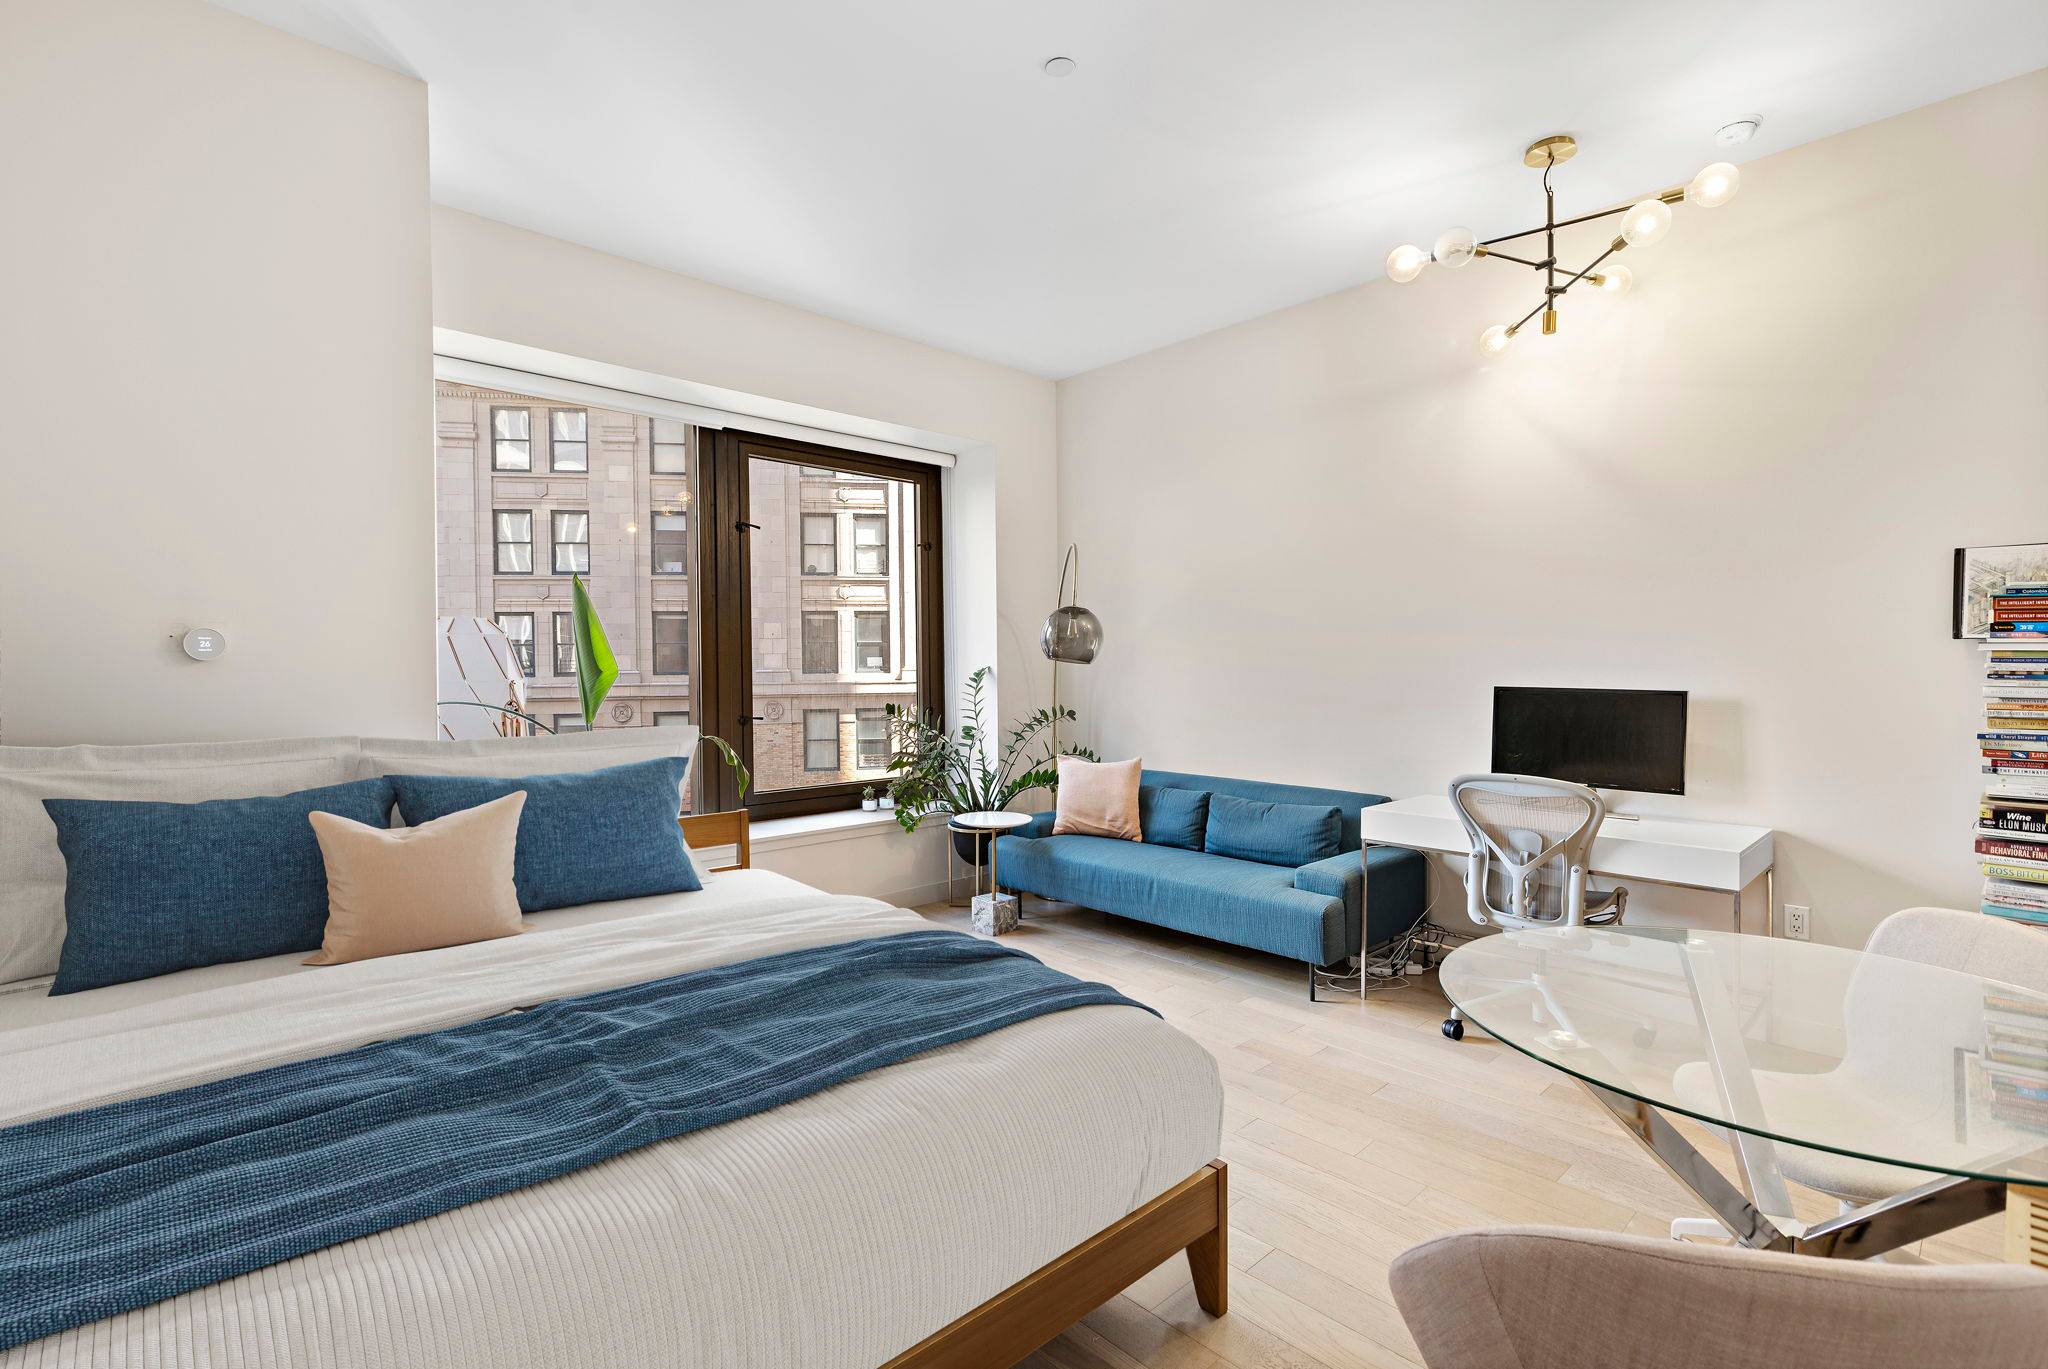 Studio on Wall Street amongst the finest listings in Downtown Manhattan.